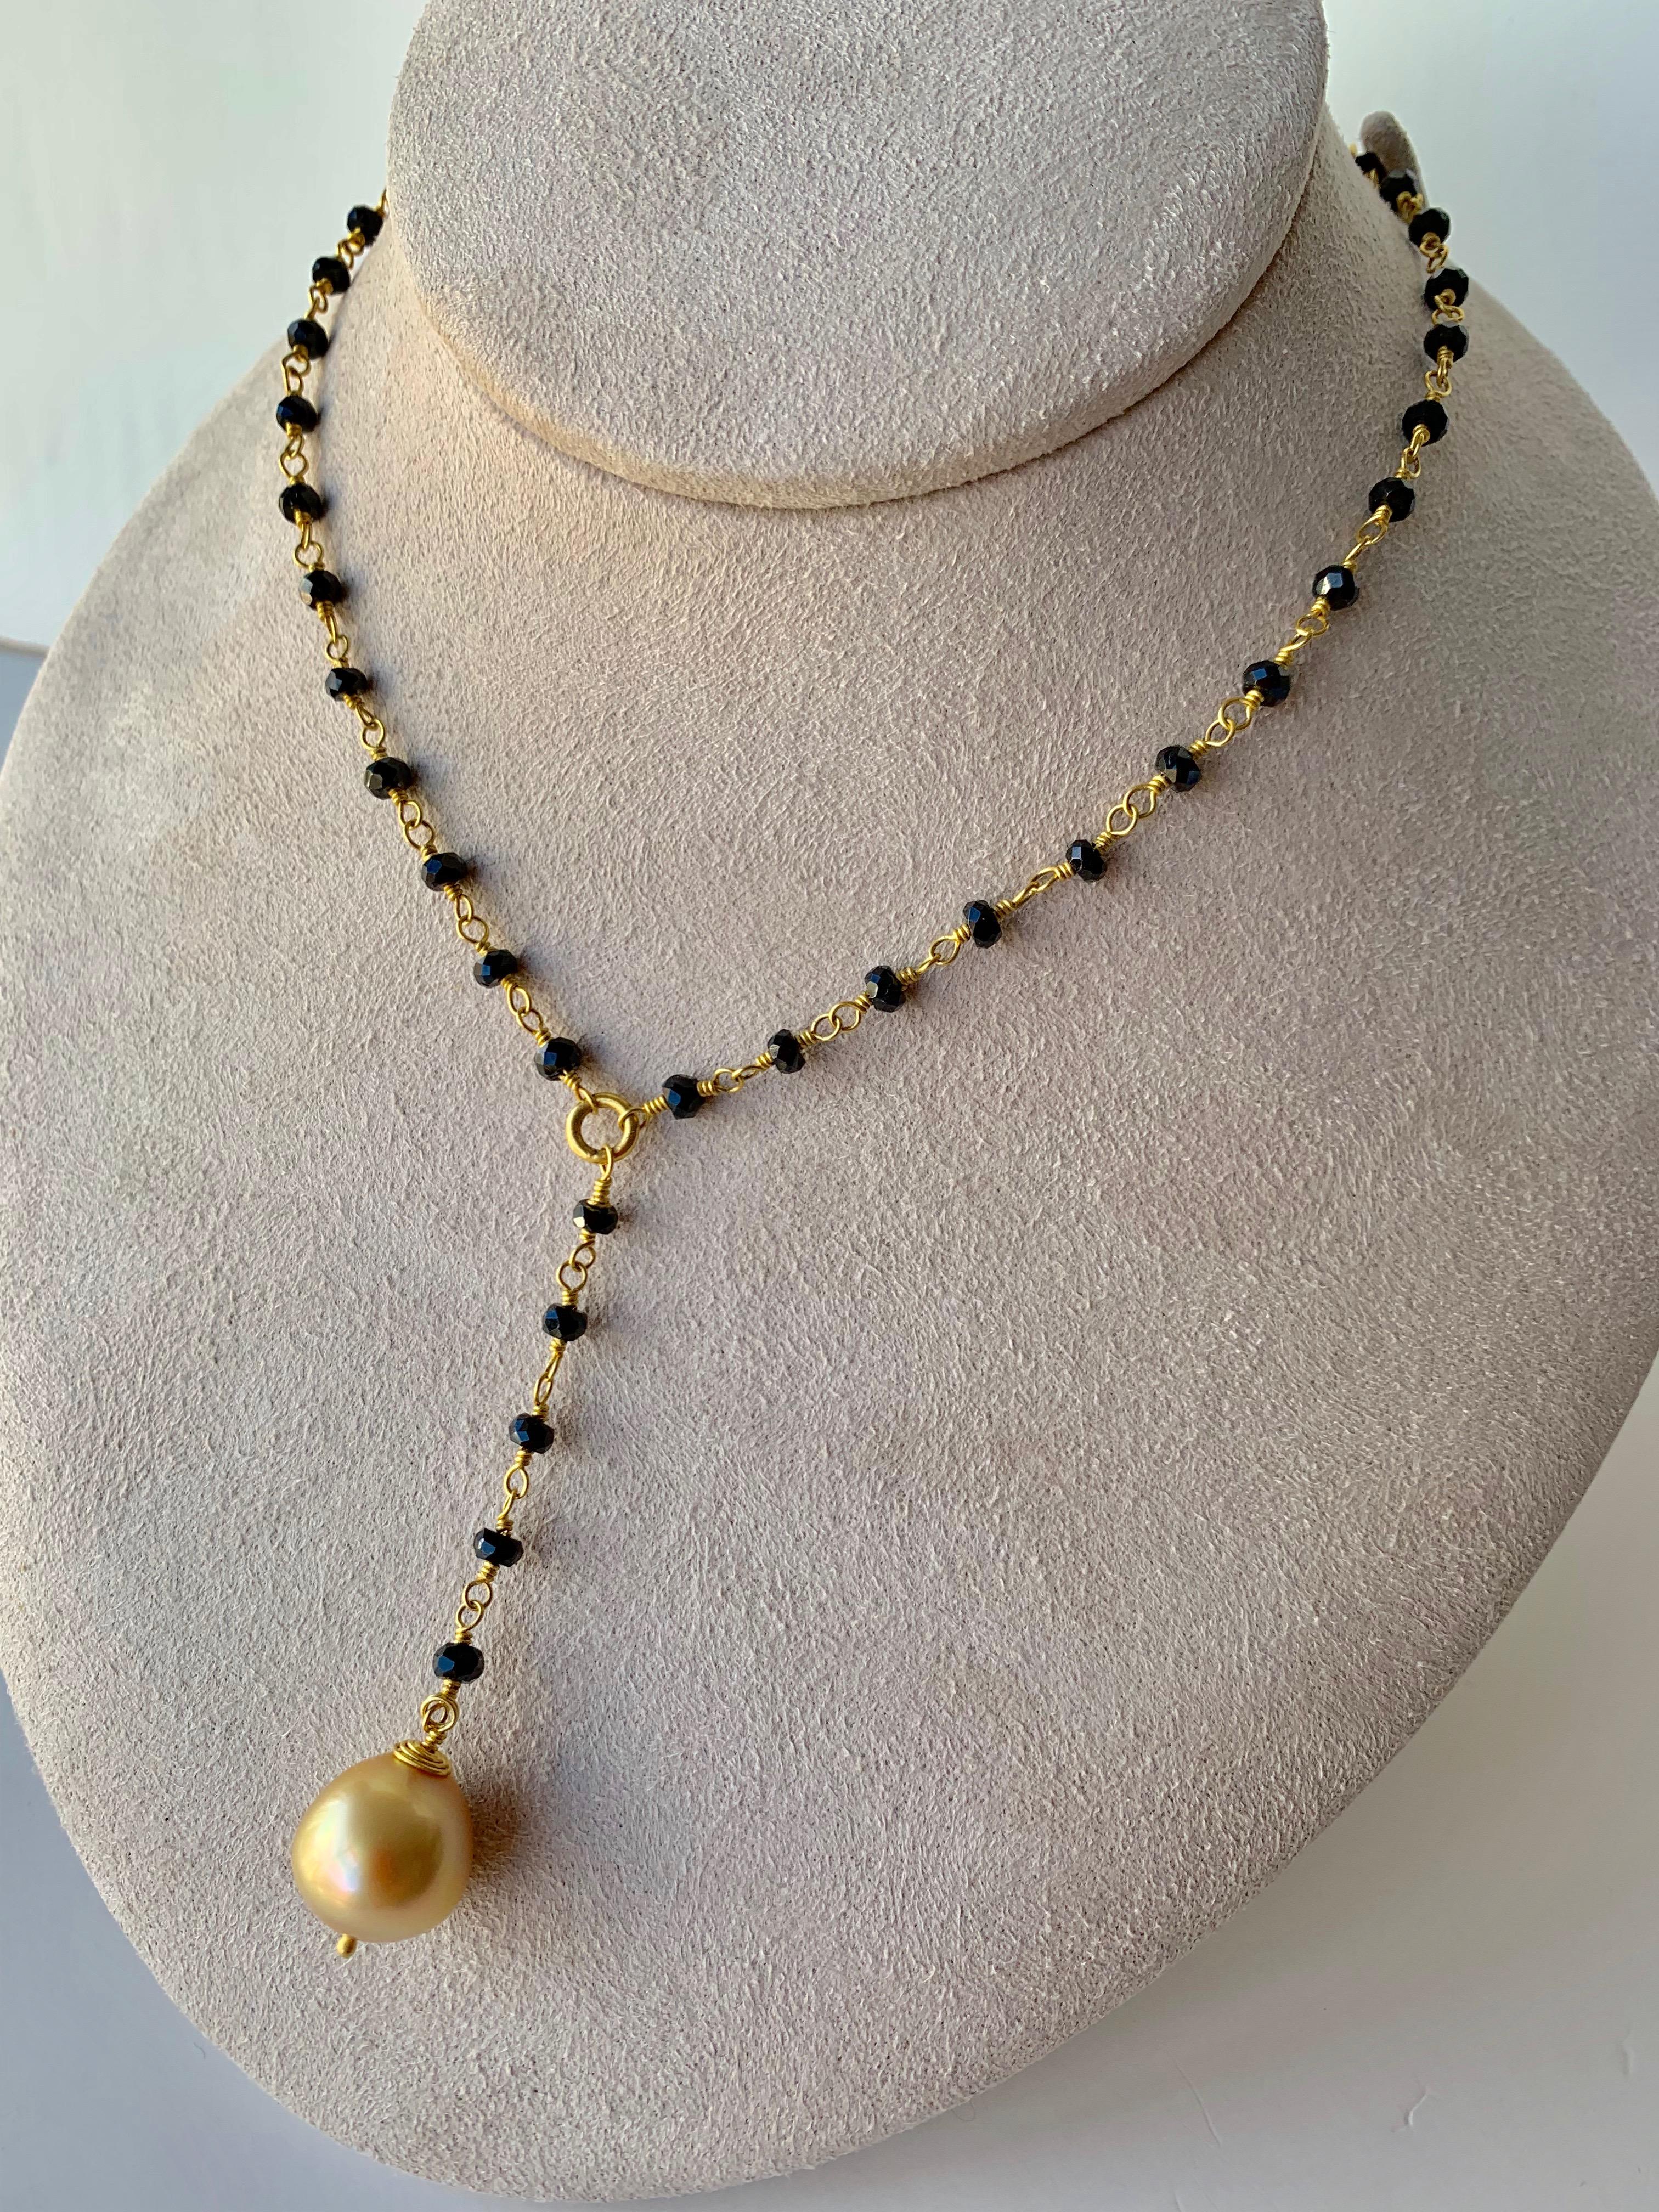 Black spinel beads on Y chain in 22 karat gold fitted with a large stunning golden South Sea cultured pearl and toggle clasp. Officially the world’s oldest gem, pearls have been revered since long before written history. Pearls were presented as